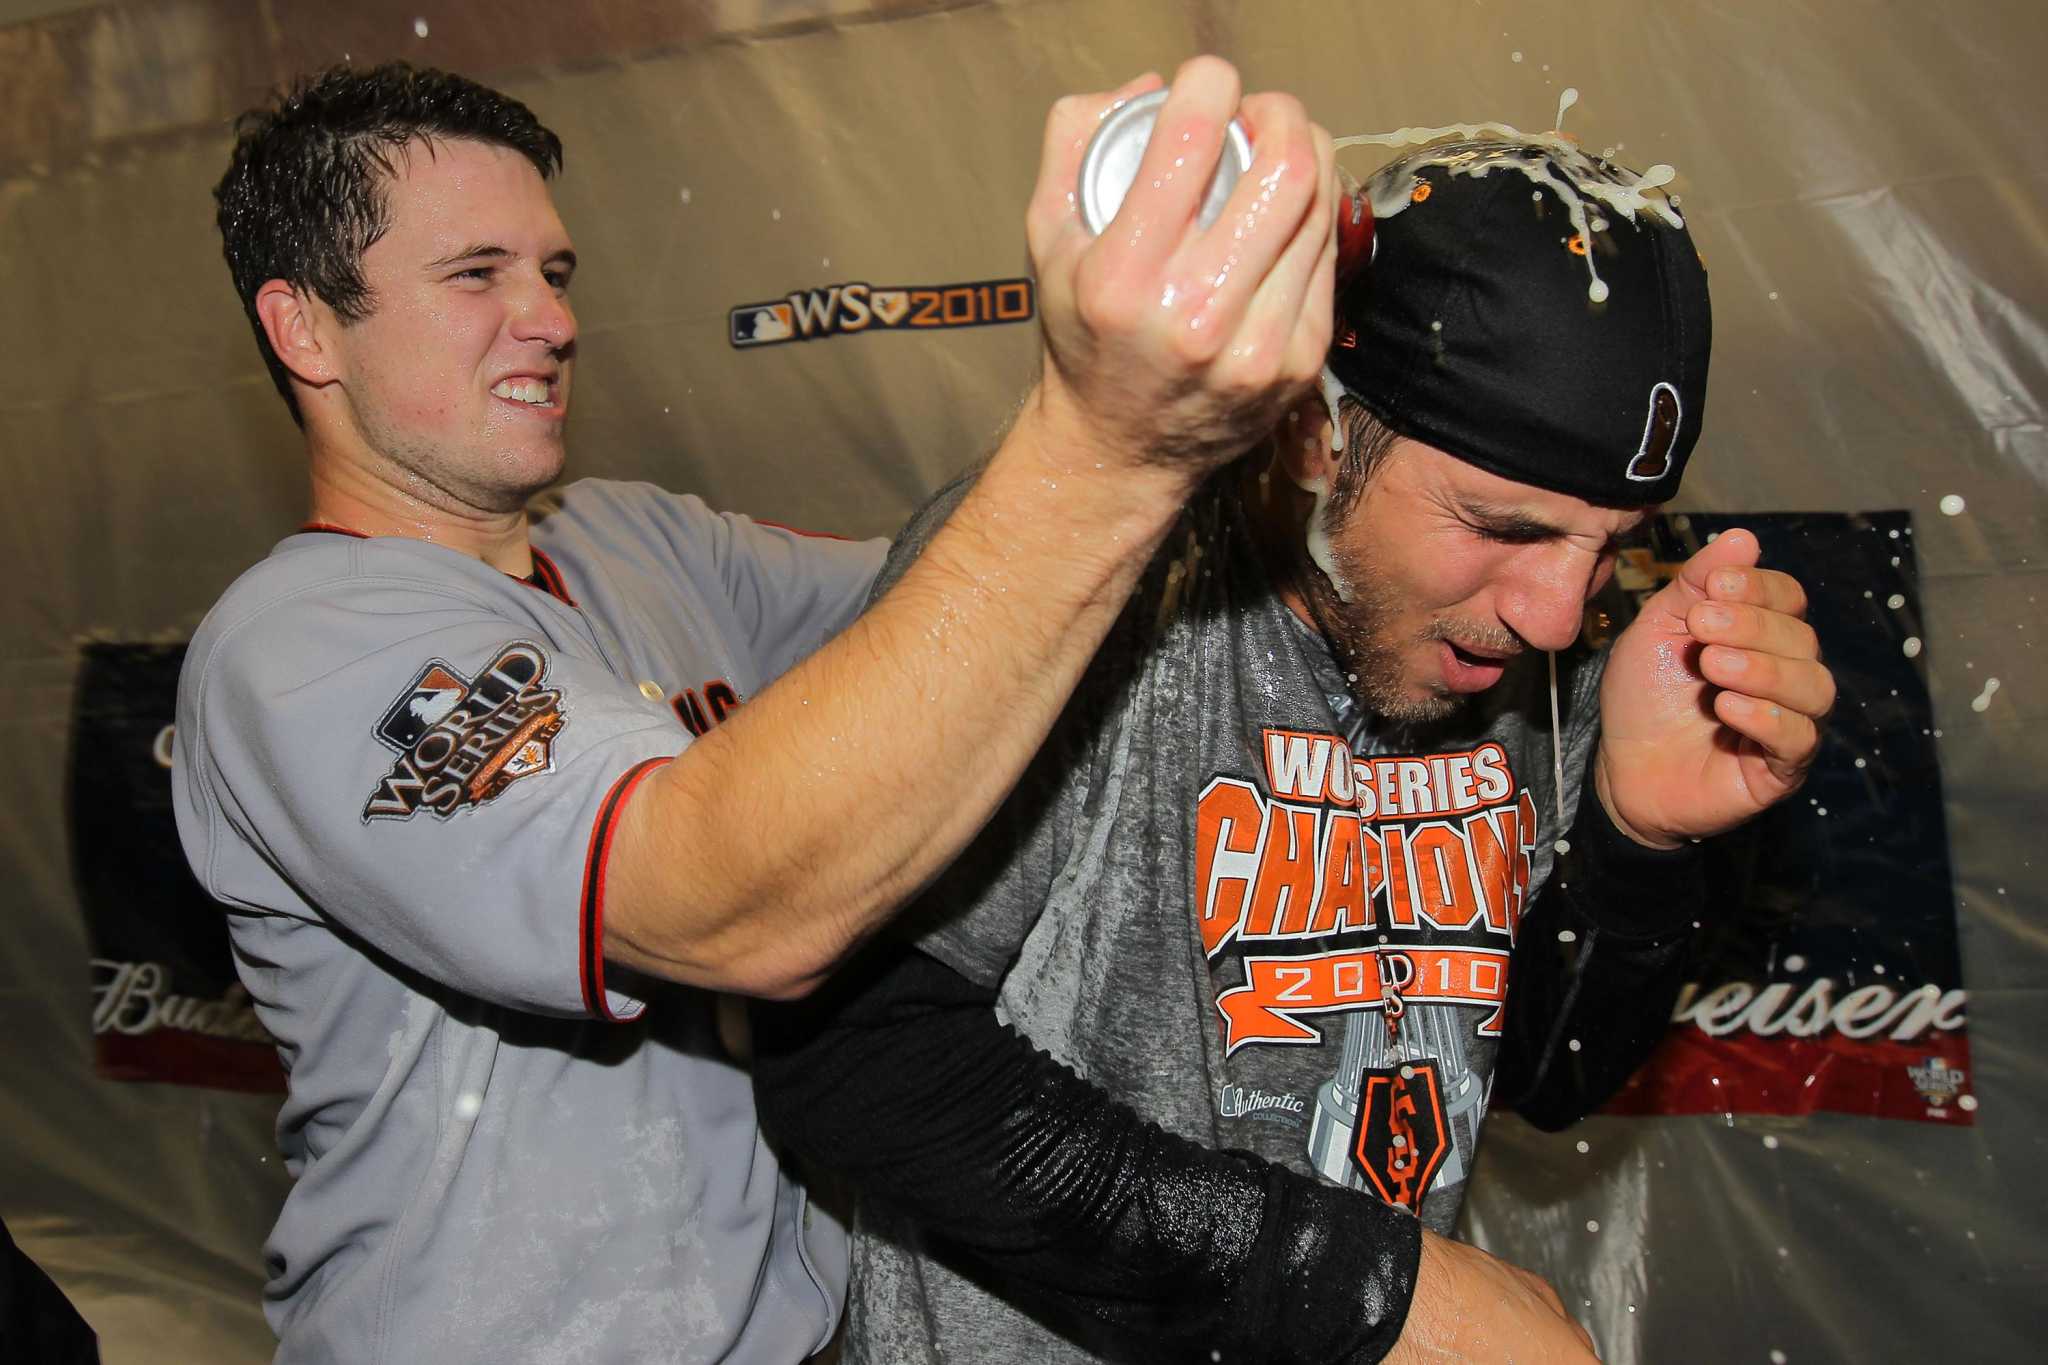 San Francisco Giants: Buster Posey and the Worst Collisions in MLB History, News, Scores, Highlights, Stats, and Rumors